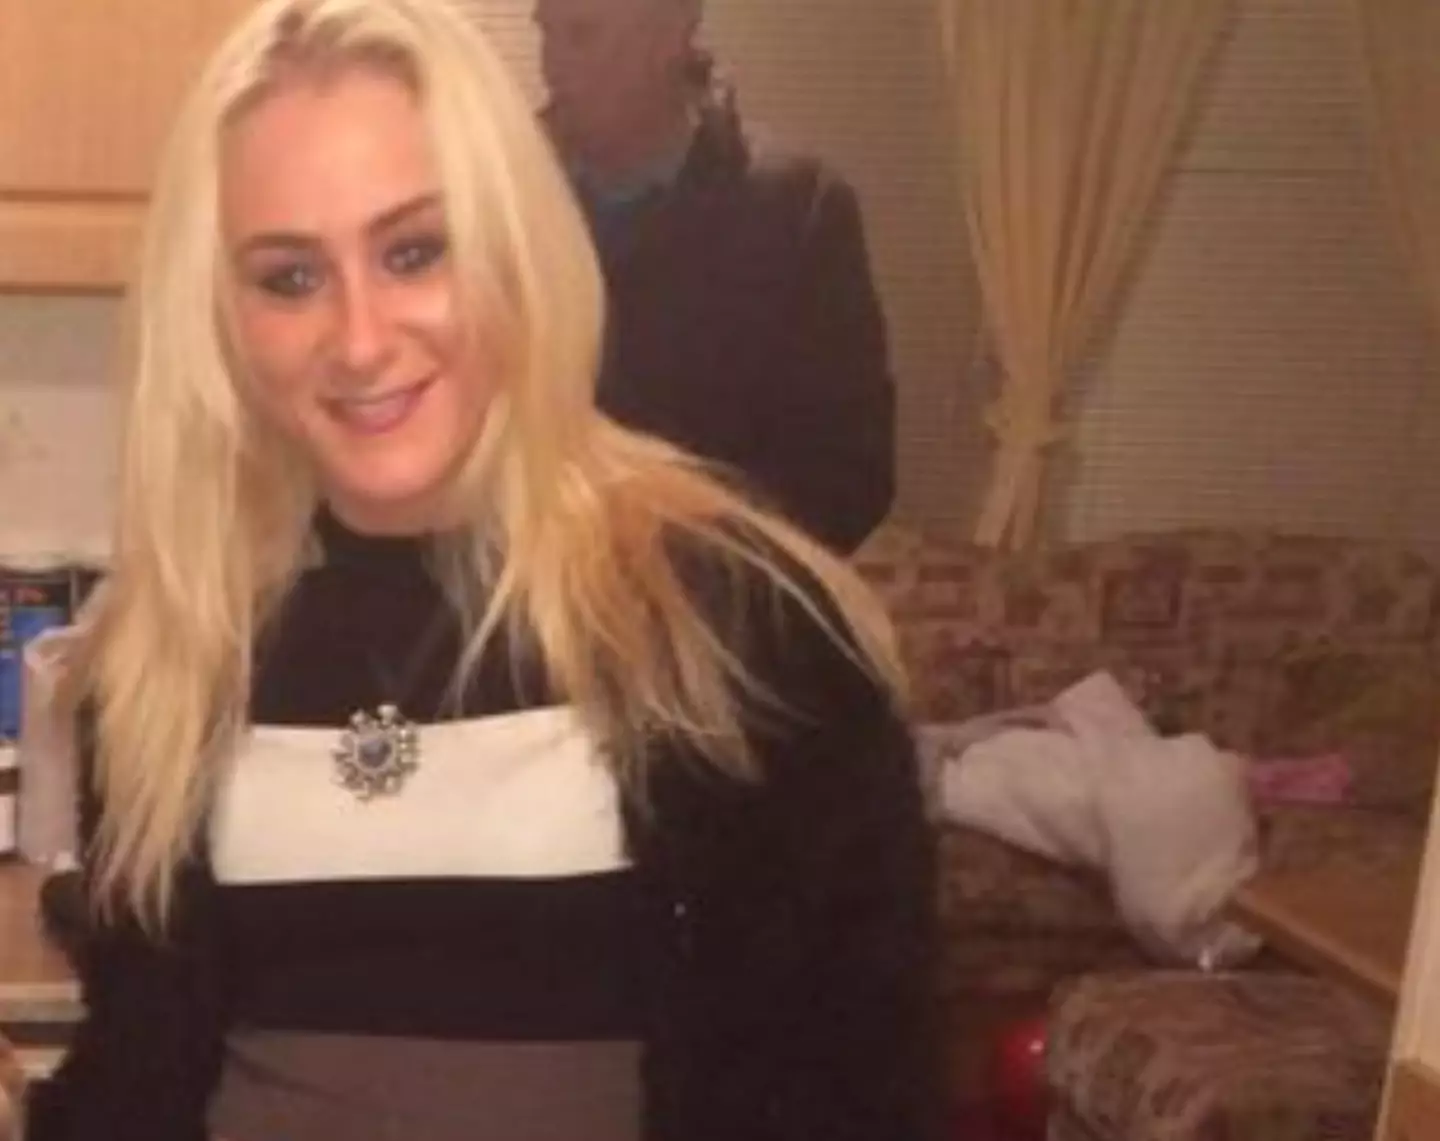 Chelsey McDonald said she had been looking forward to the night out after a 'stressful' day.